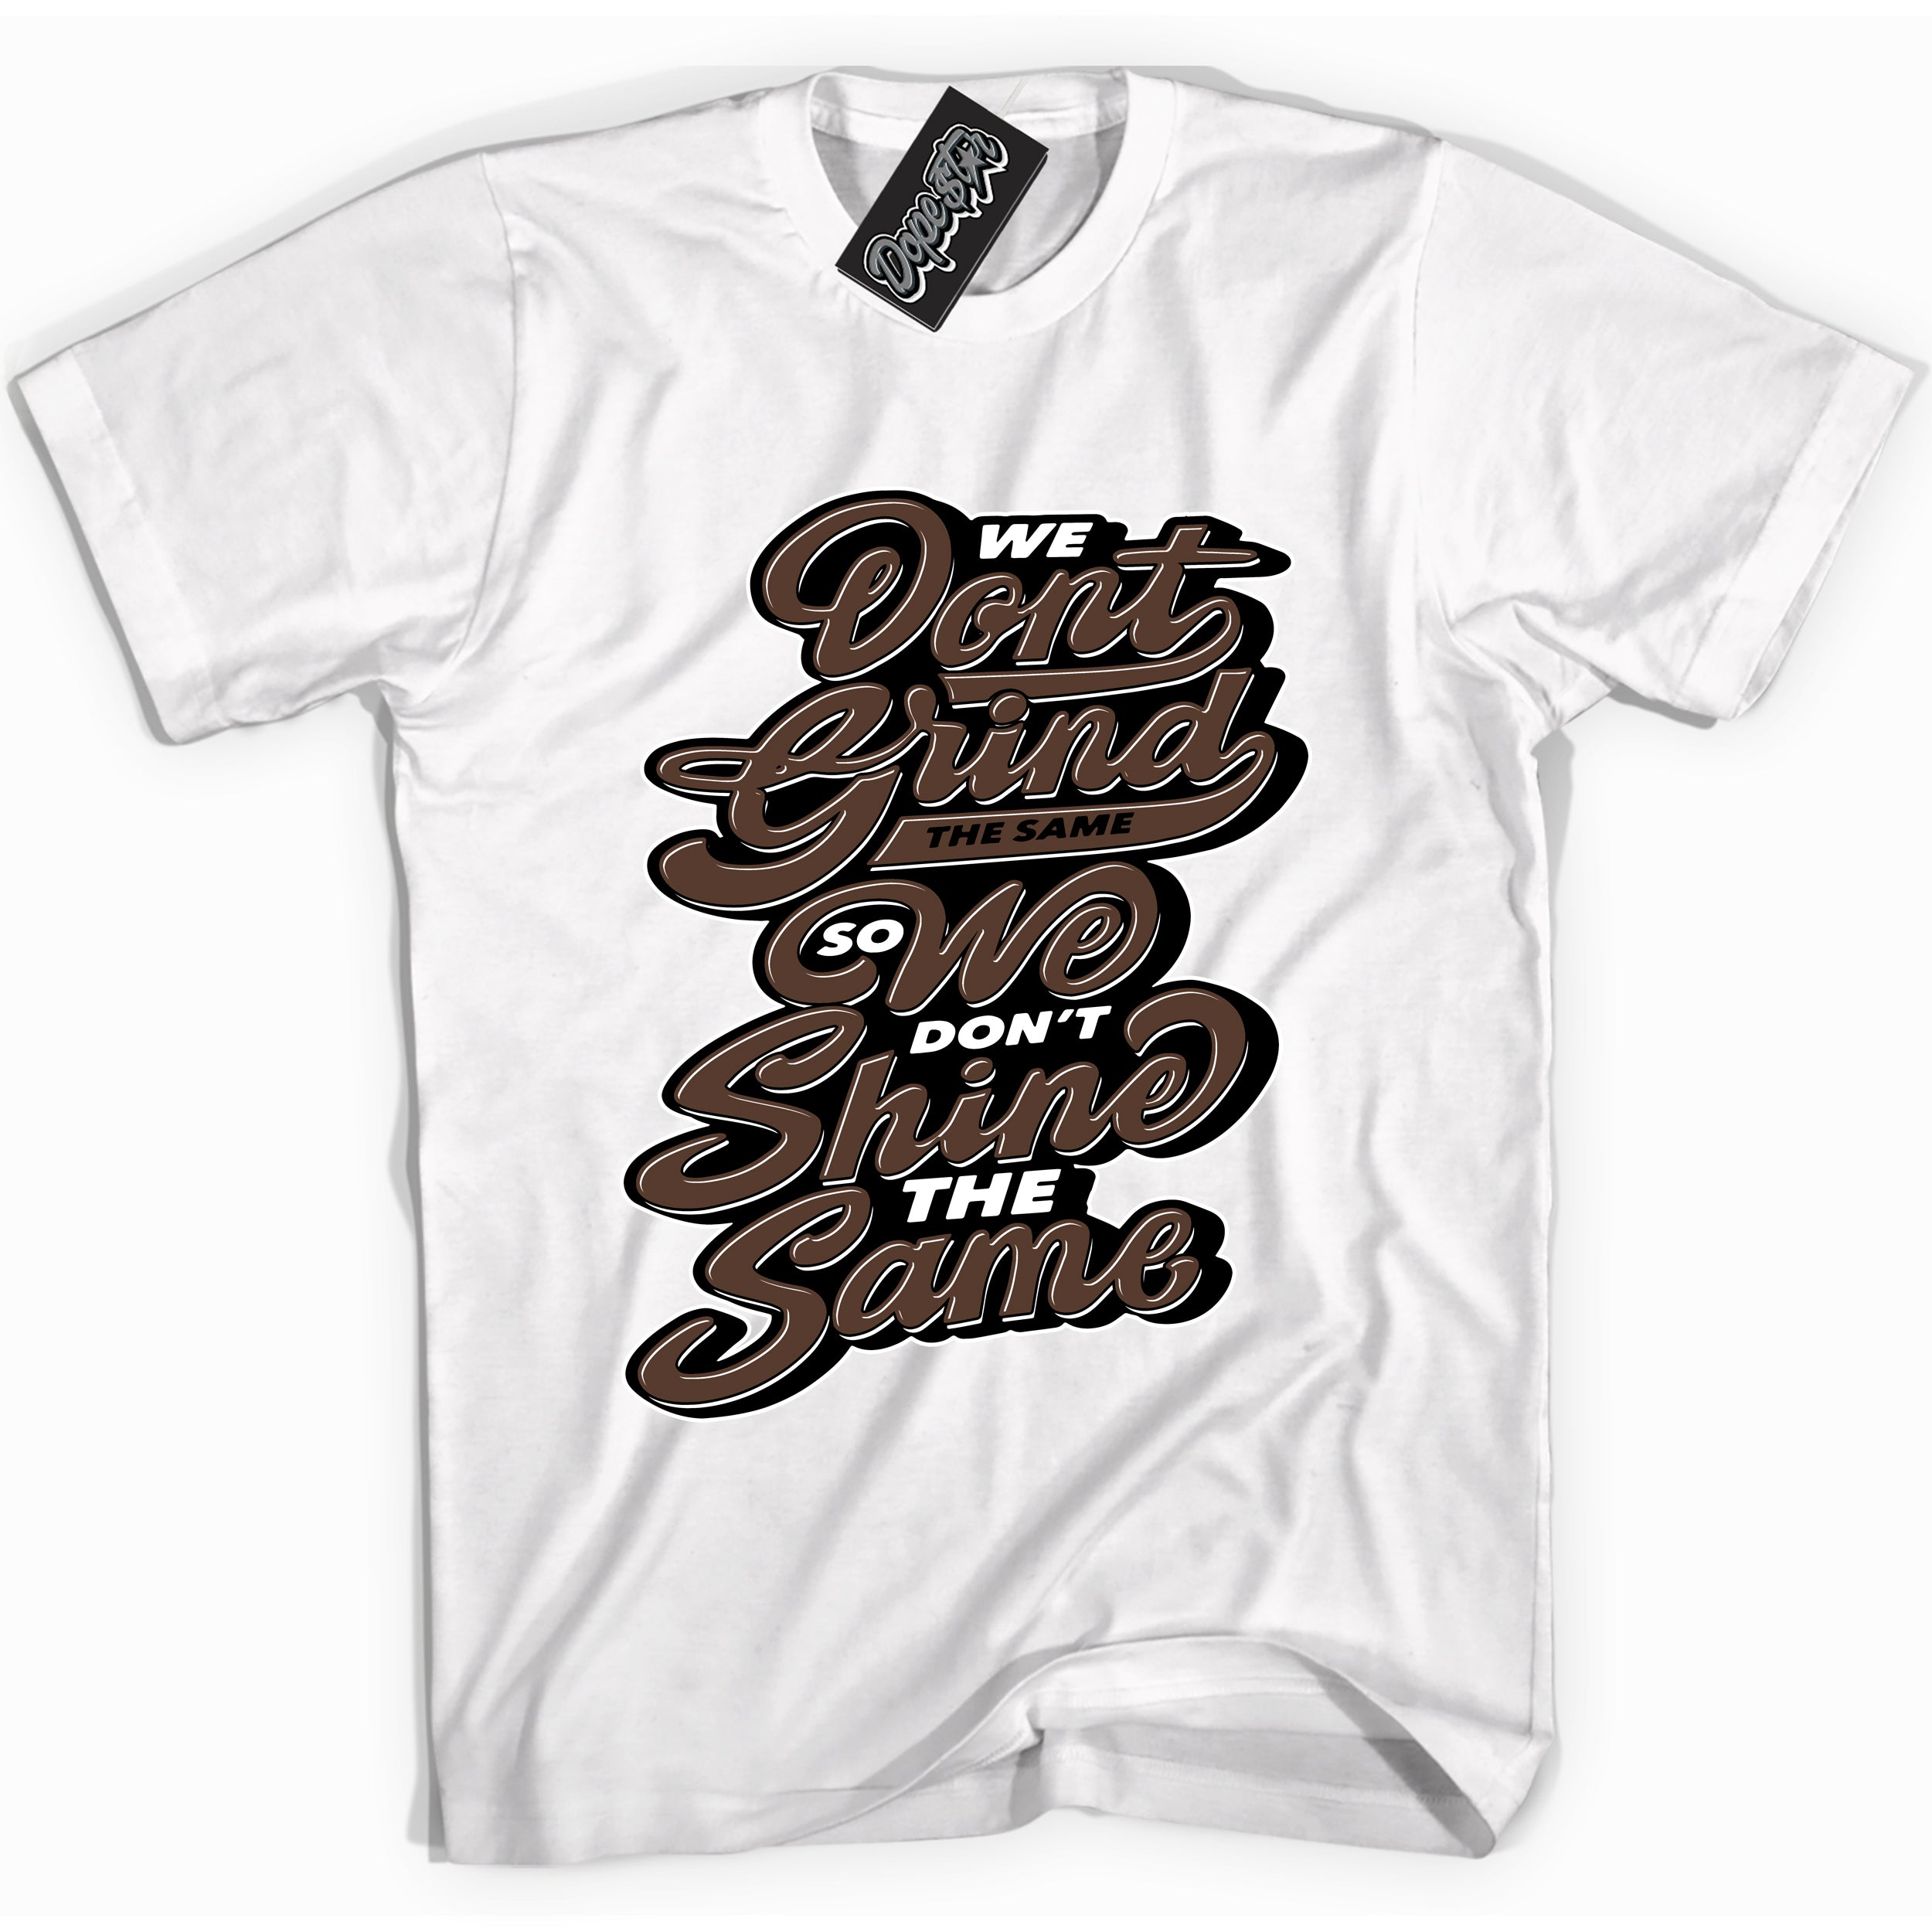 Cool White graphic tee with “ Grind Shine ” design, that perfectly matches Palomino 1s sneakers 